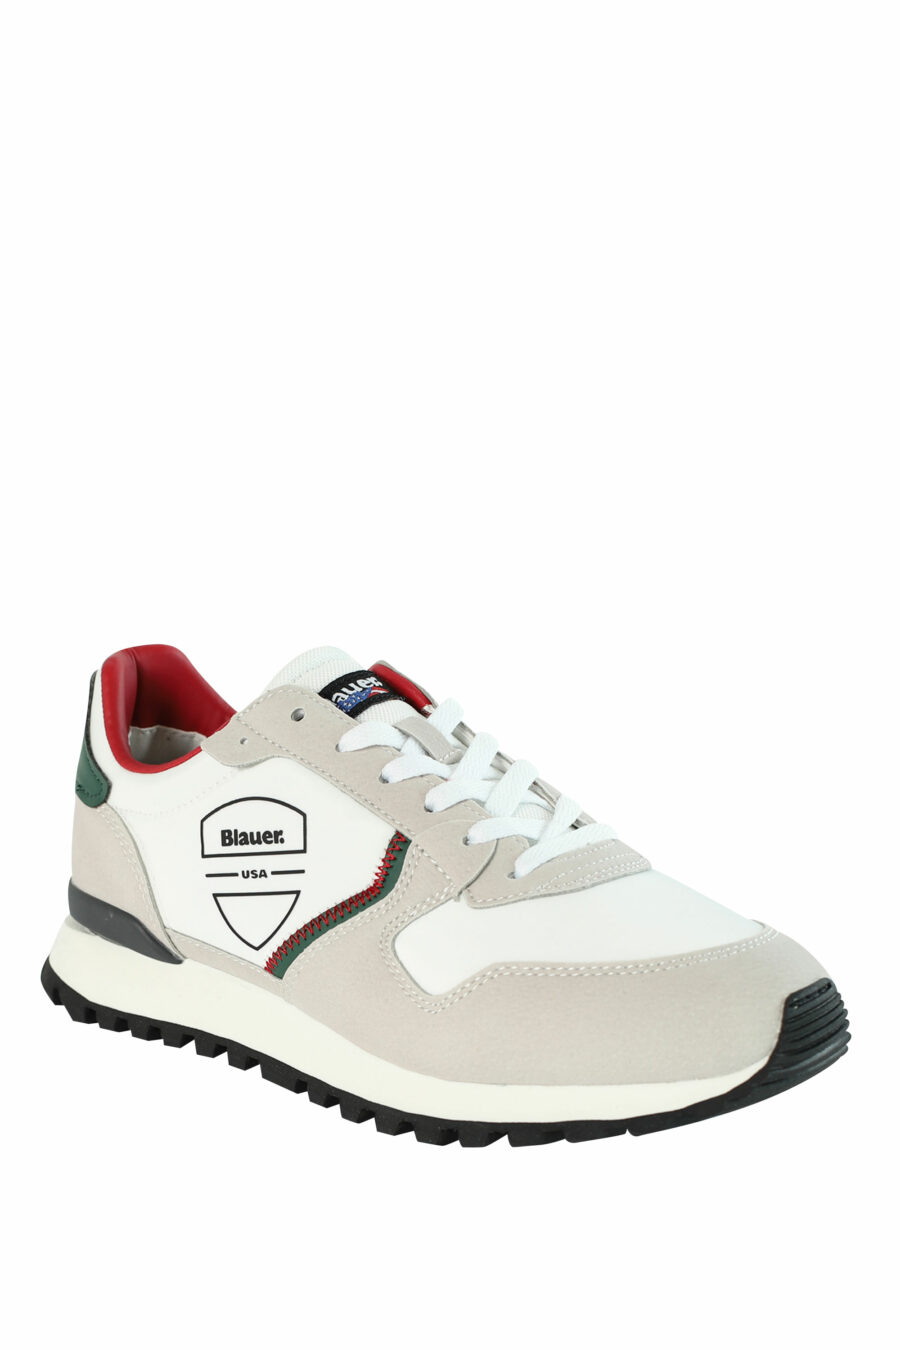 Trainers "DIXON" white mix with red and green details - 8058156493902 2